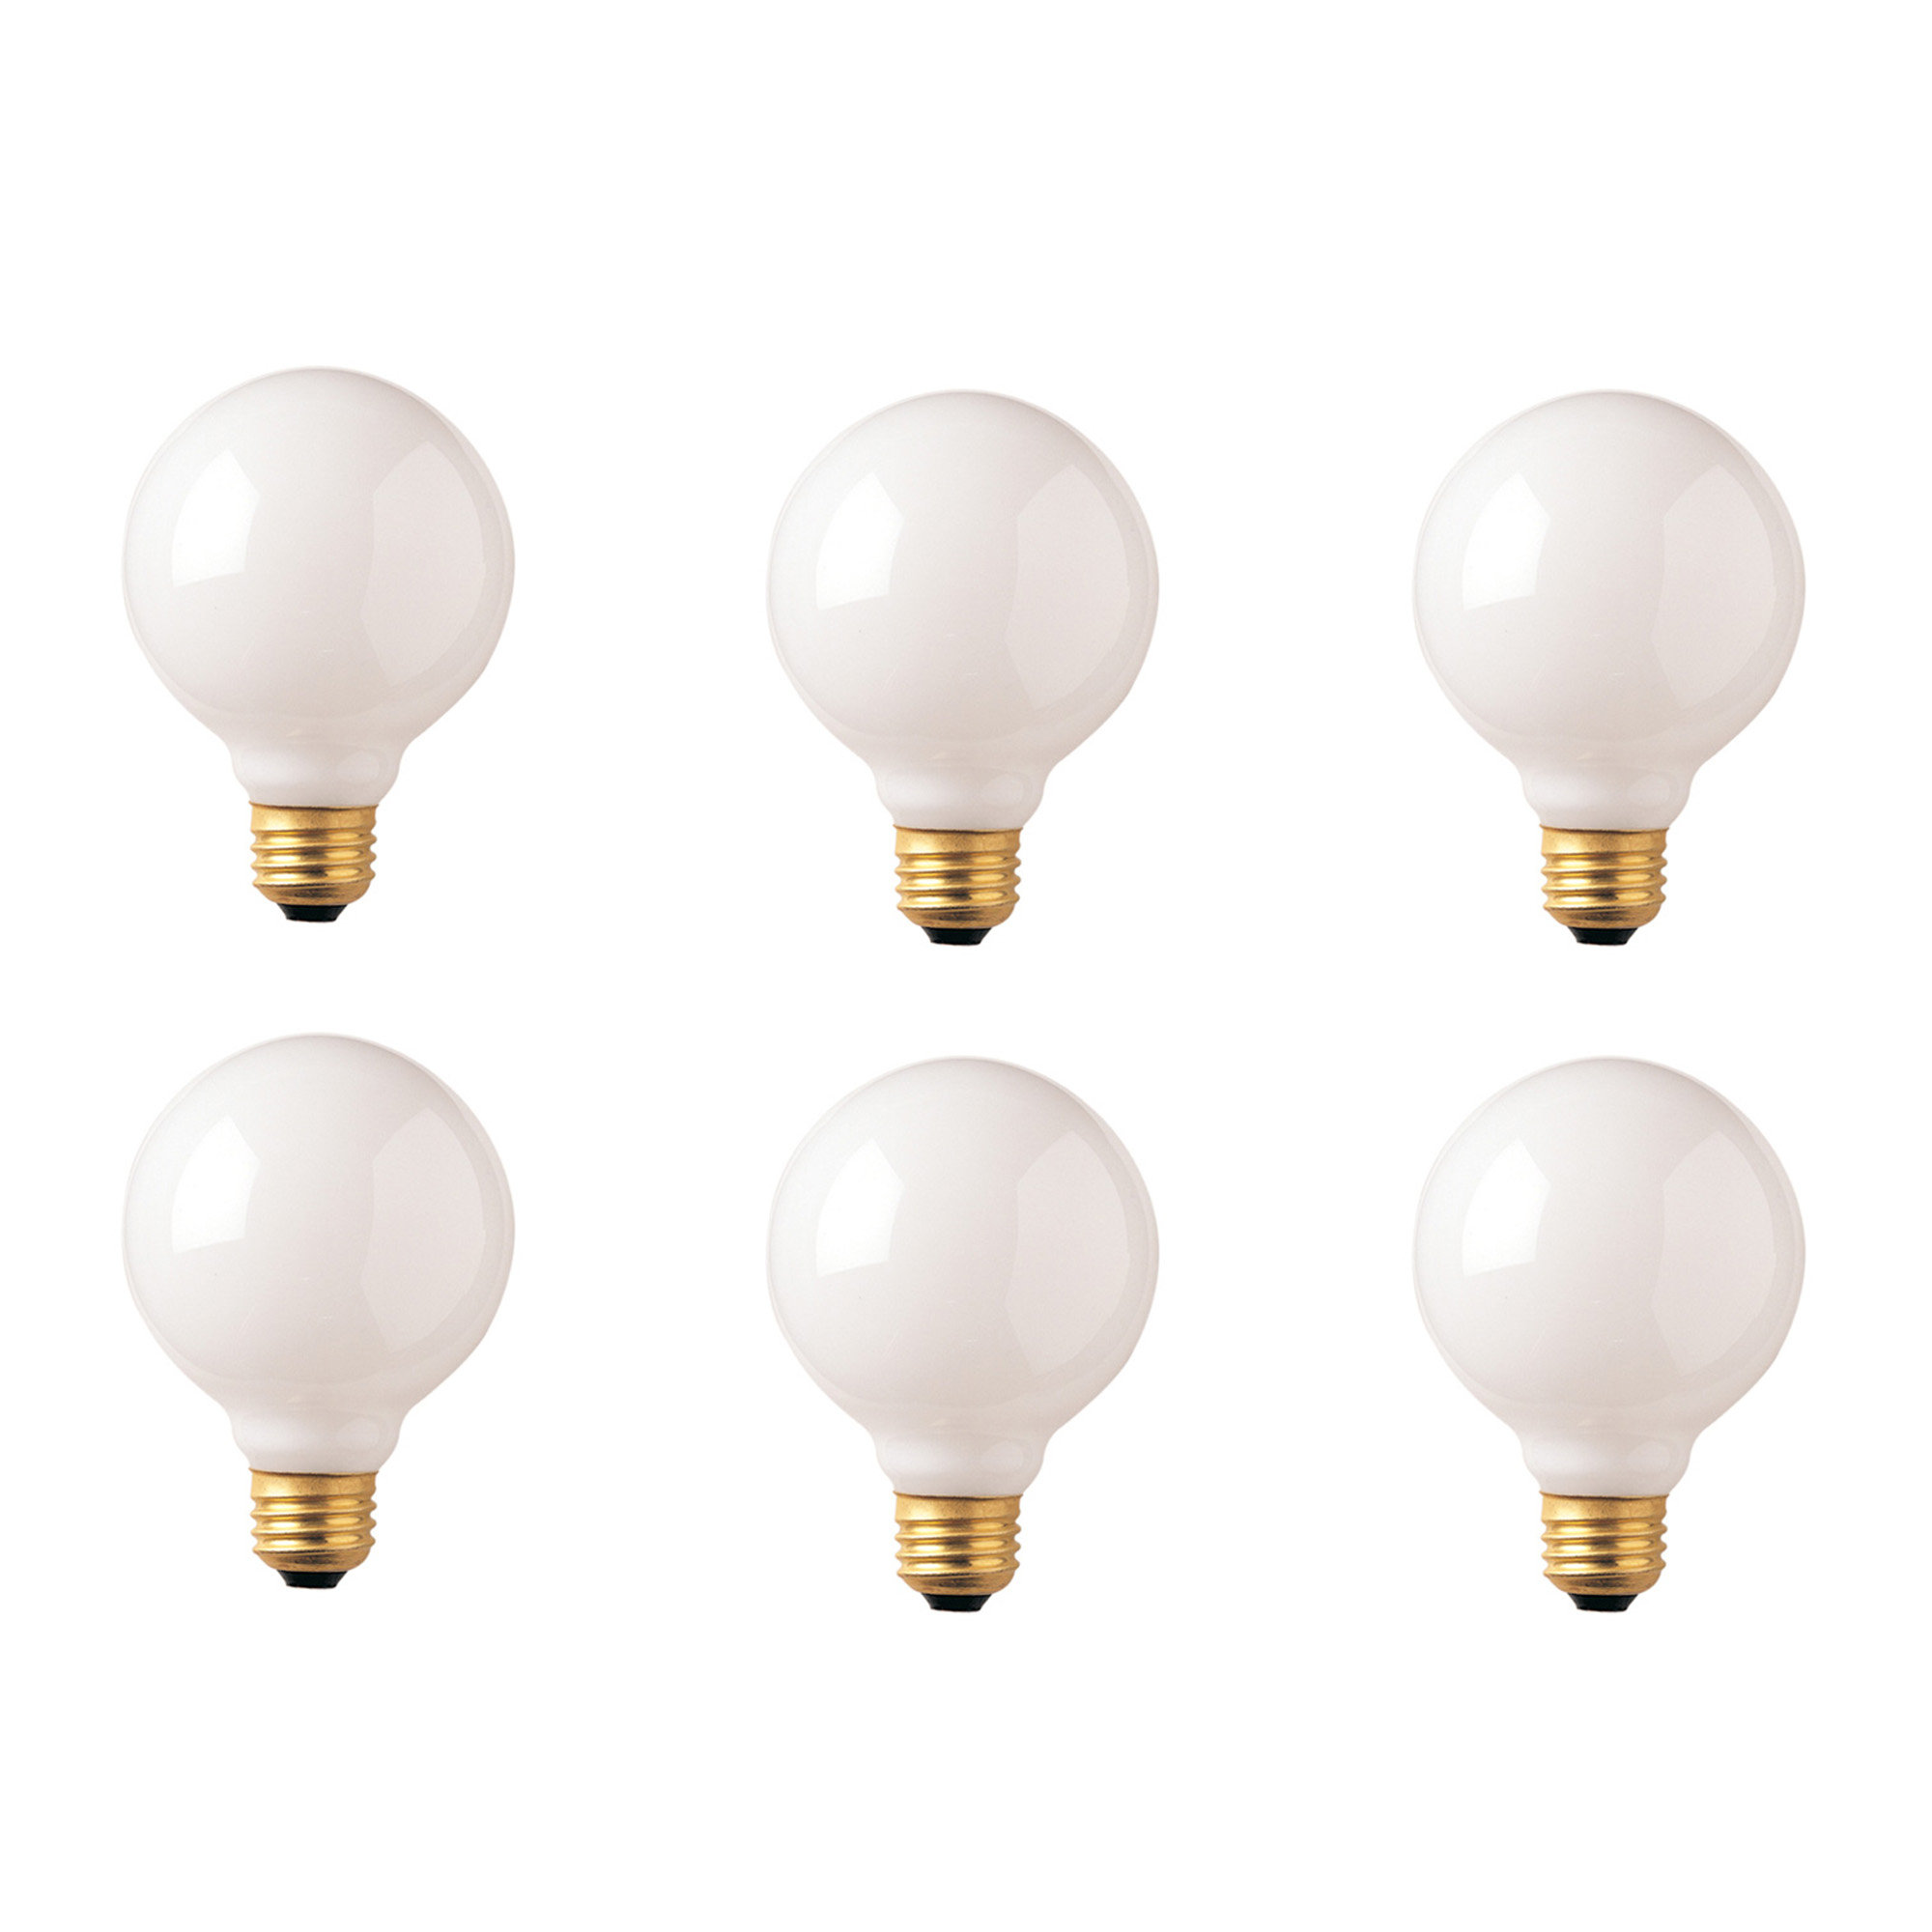 6PACK,4W 6000K HLIGHT B22 Filament LED Light Bulb 4W Incandescent Bayonet Lamp G45 2700K Warm White Replacement 40W Rustic Clear Energy Class A 